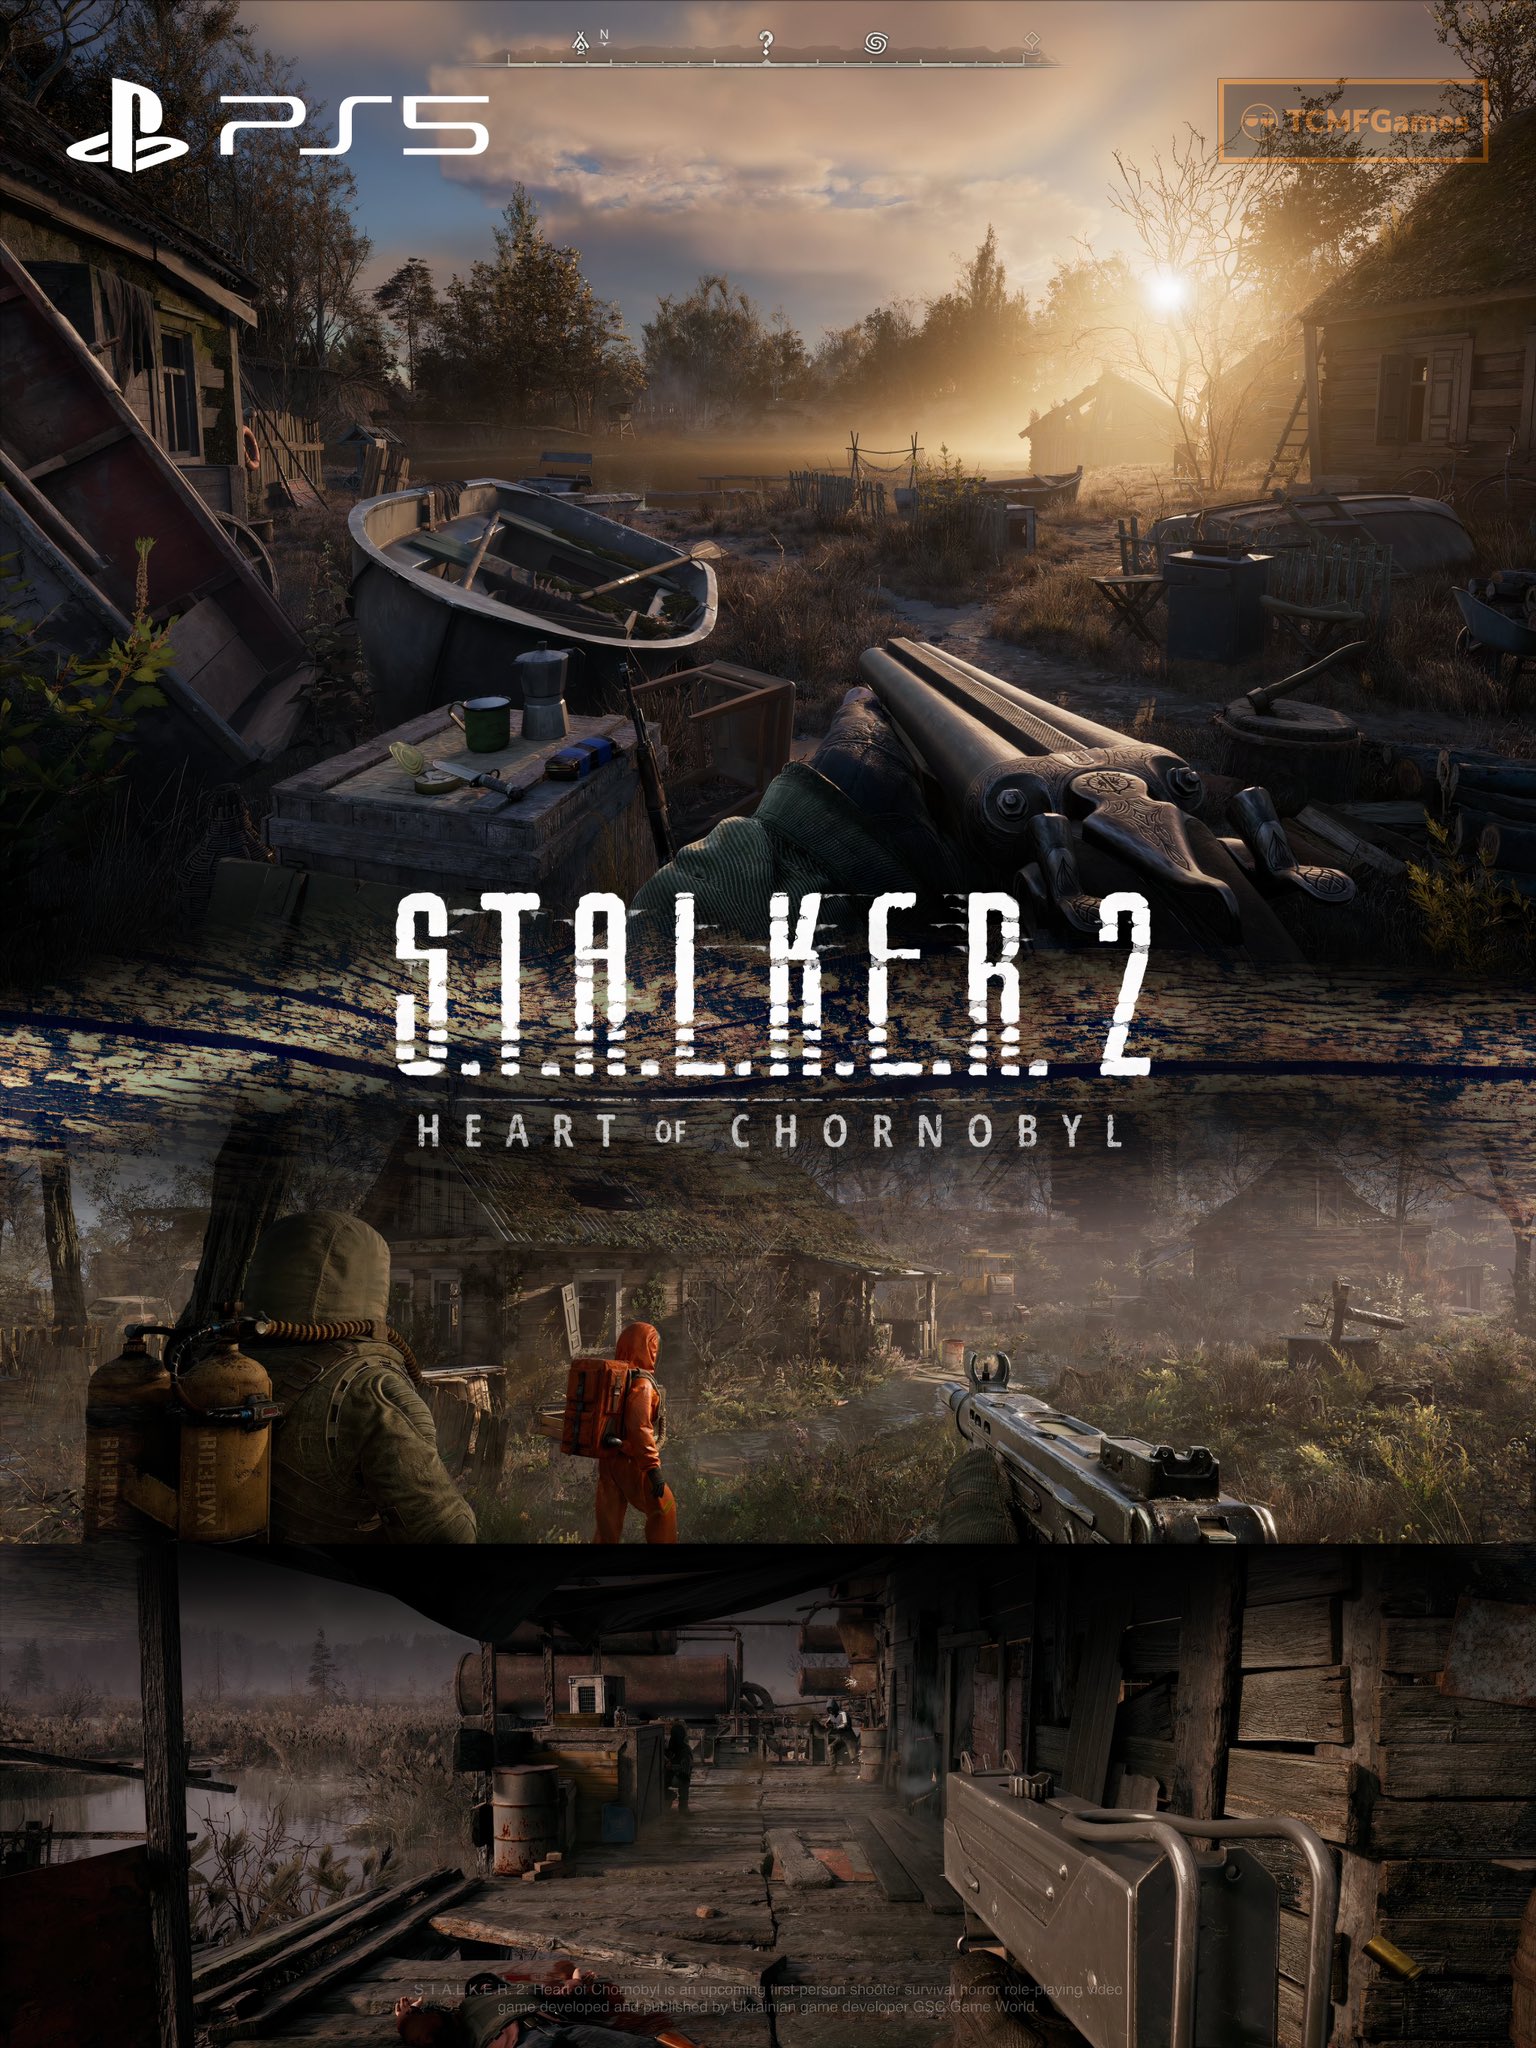 The new STALKER 2 gameplay looks Incredible 